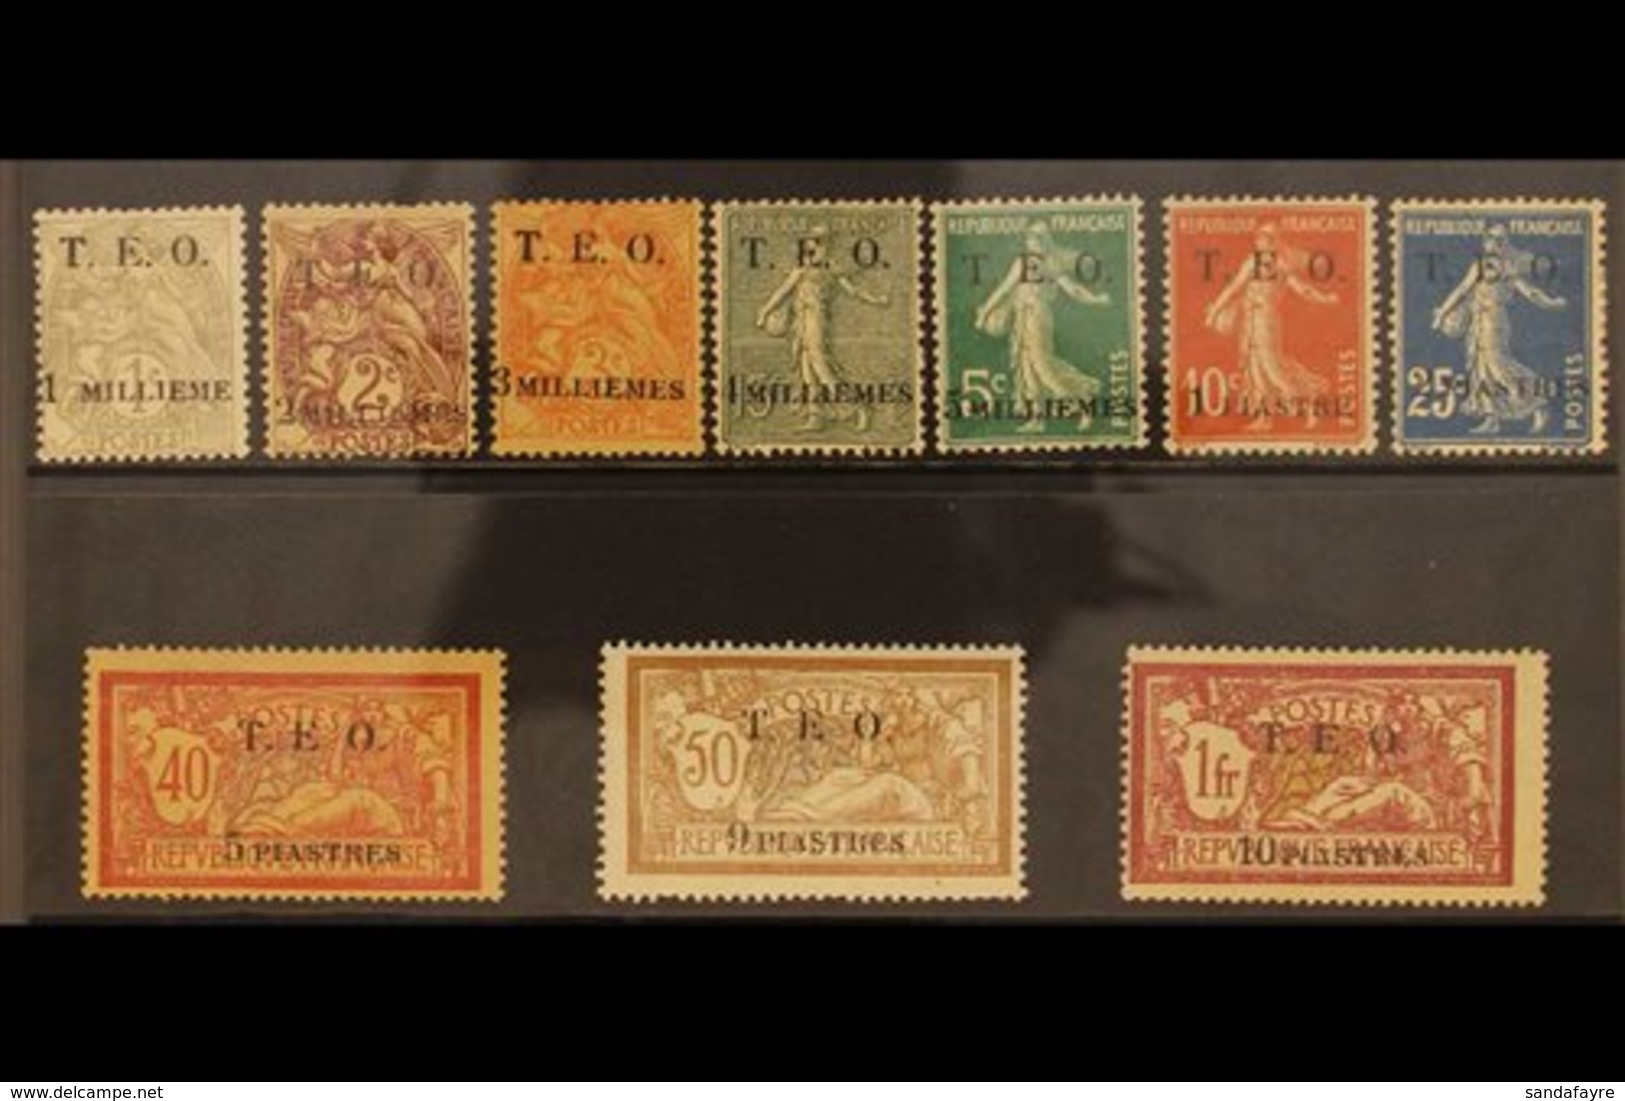 1919  T.E.O. 2 Line Surcharge Set Complete, SG 1-10, Fine To Very Fine Mint.  High Values Signed Brun. Scarce Set. (10 S - Syria